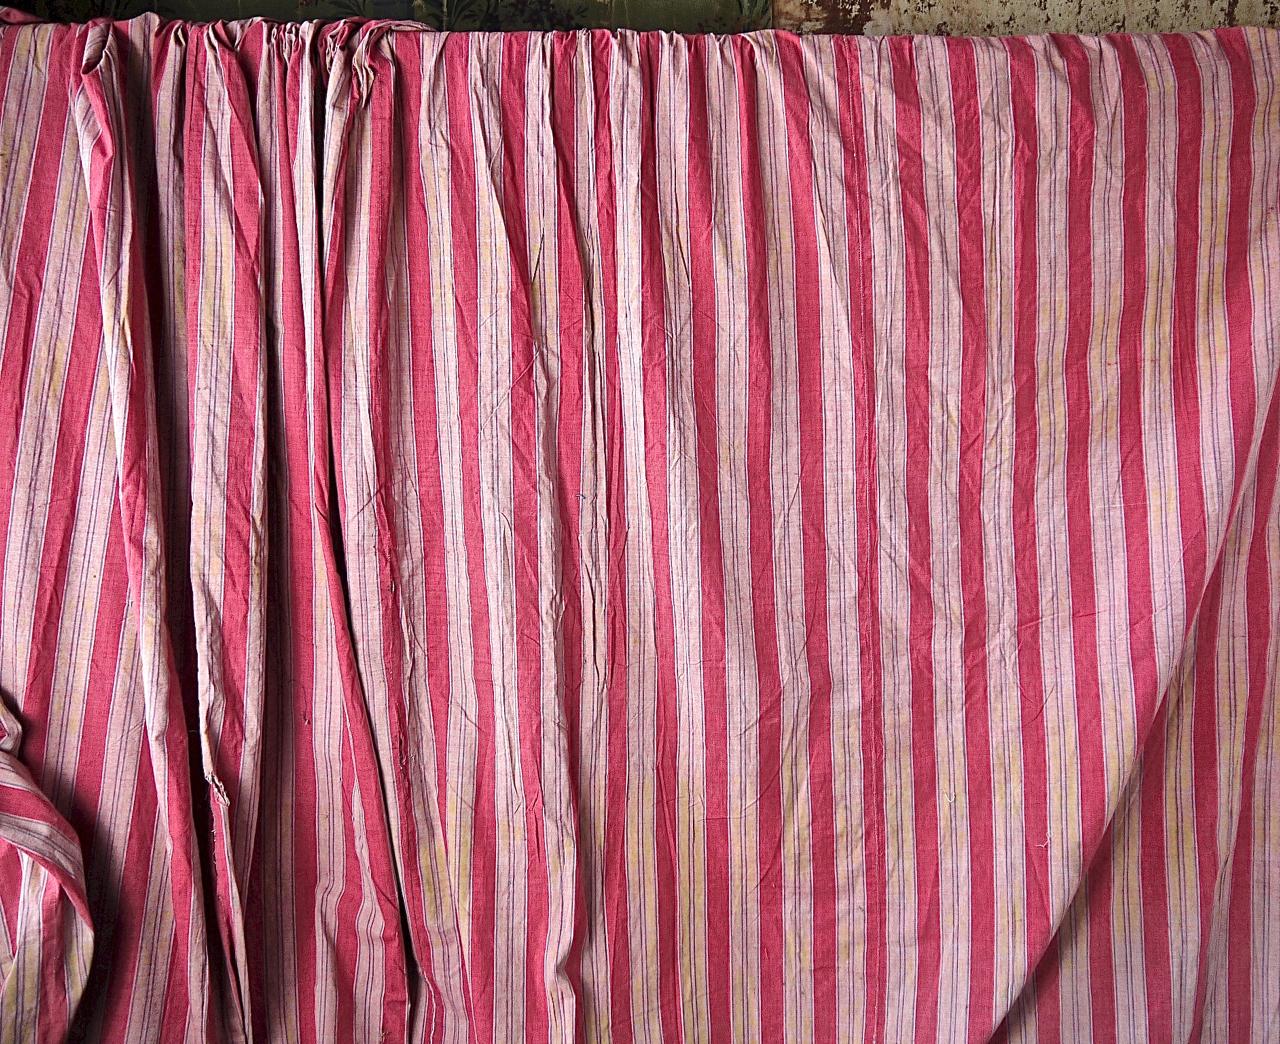 Late 18th century French soft red woven striped cotton large curtains that have a slight faded trace of yellow in some of the areas of the stripe. Trimmed along the side edges and across the gathered top. Some old repairs and small marks in a few